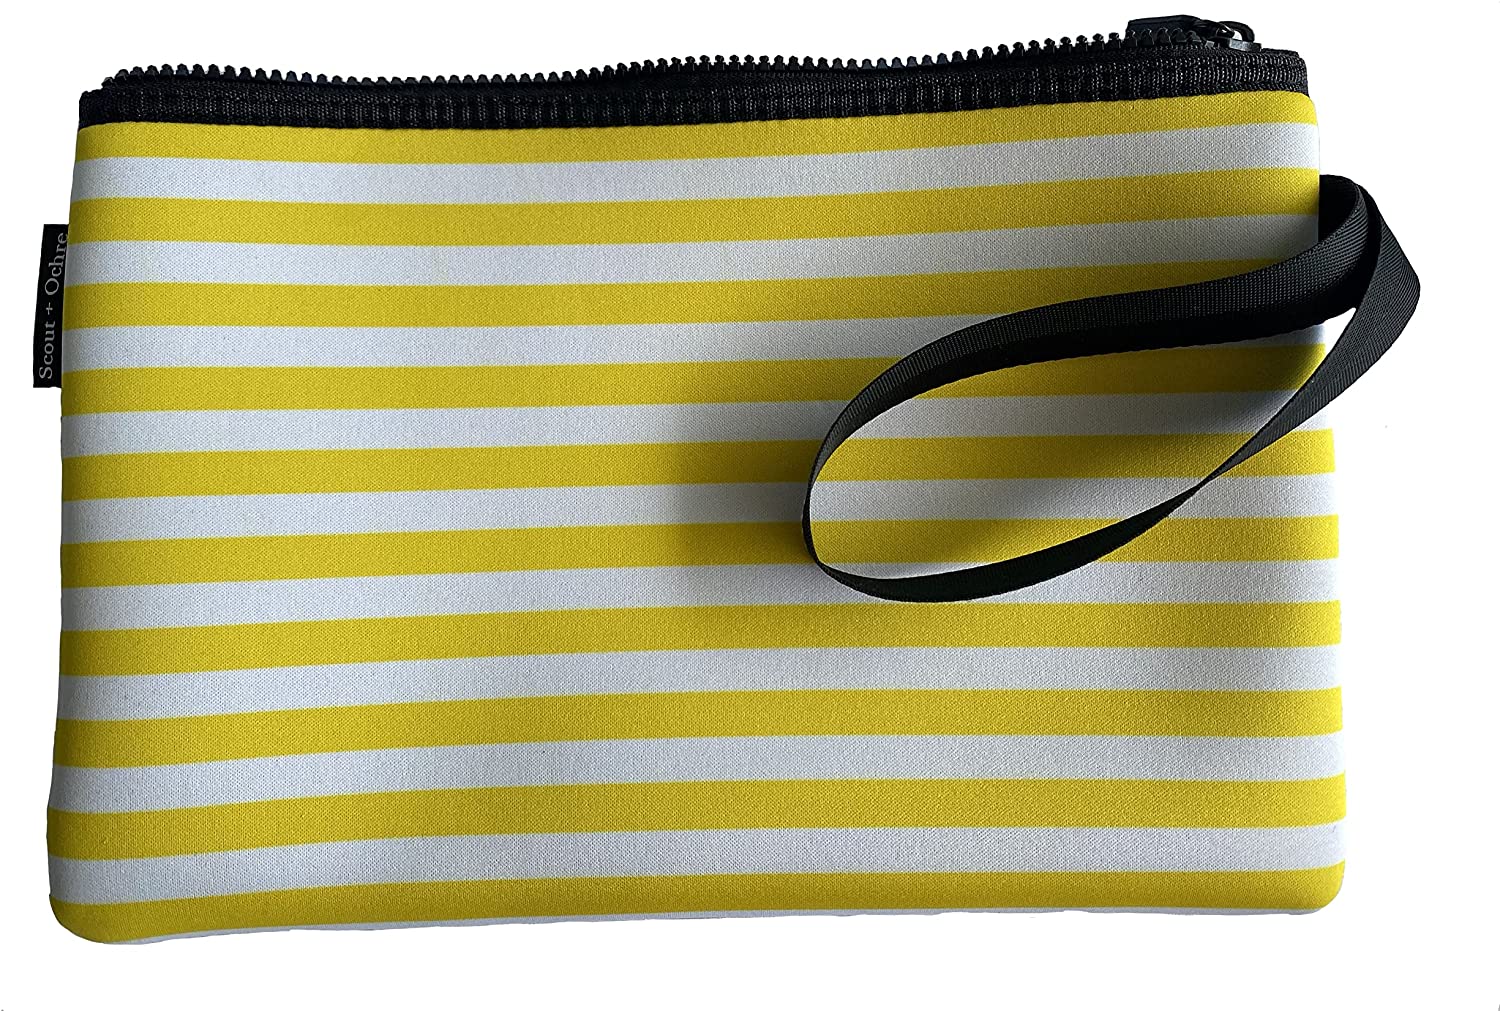 Neoprene makeup cosmetic bags for swimsuit